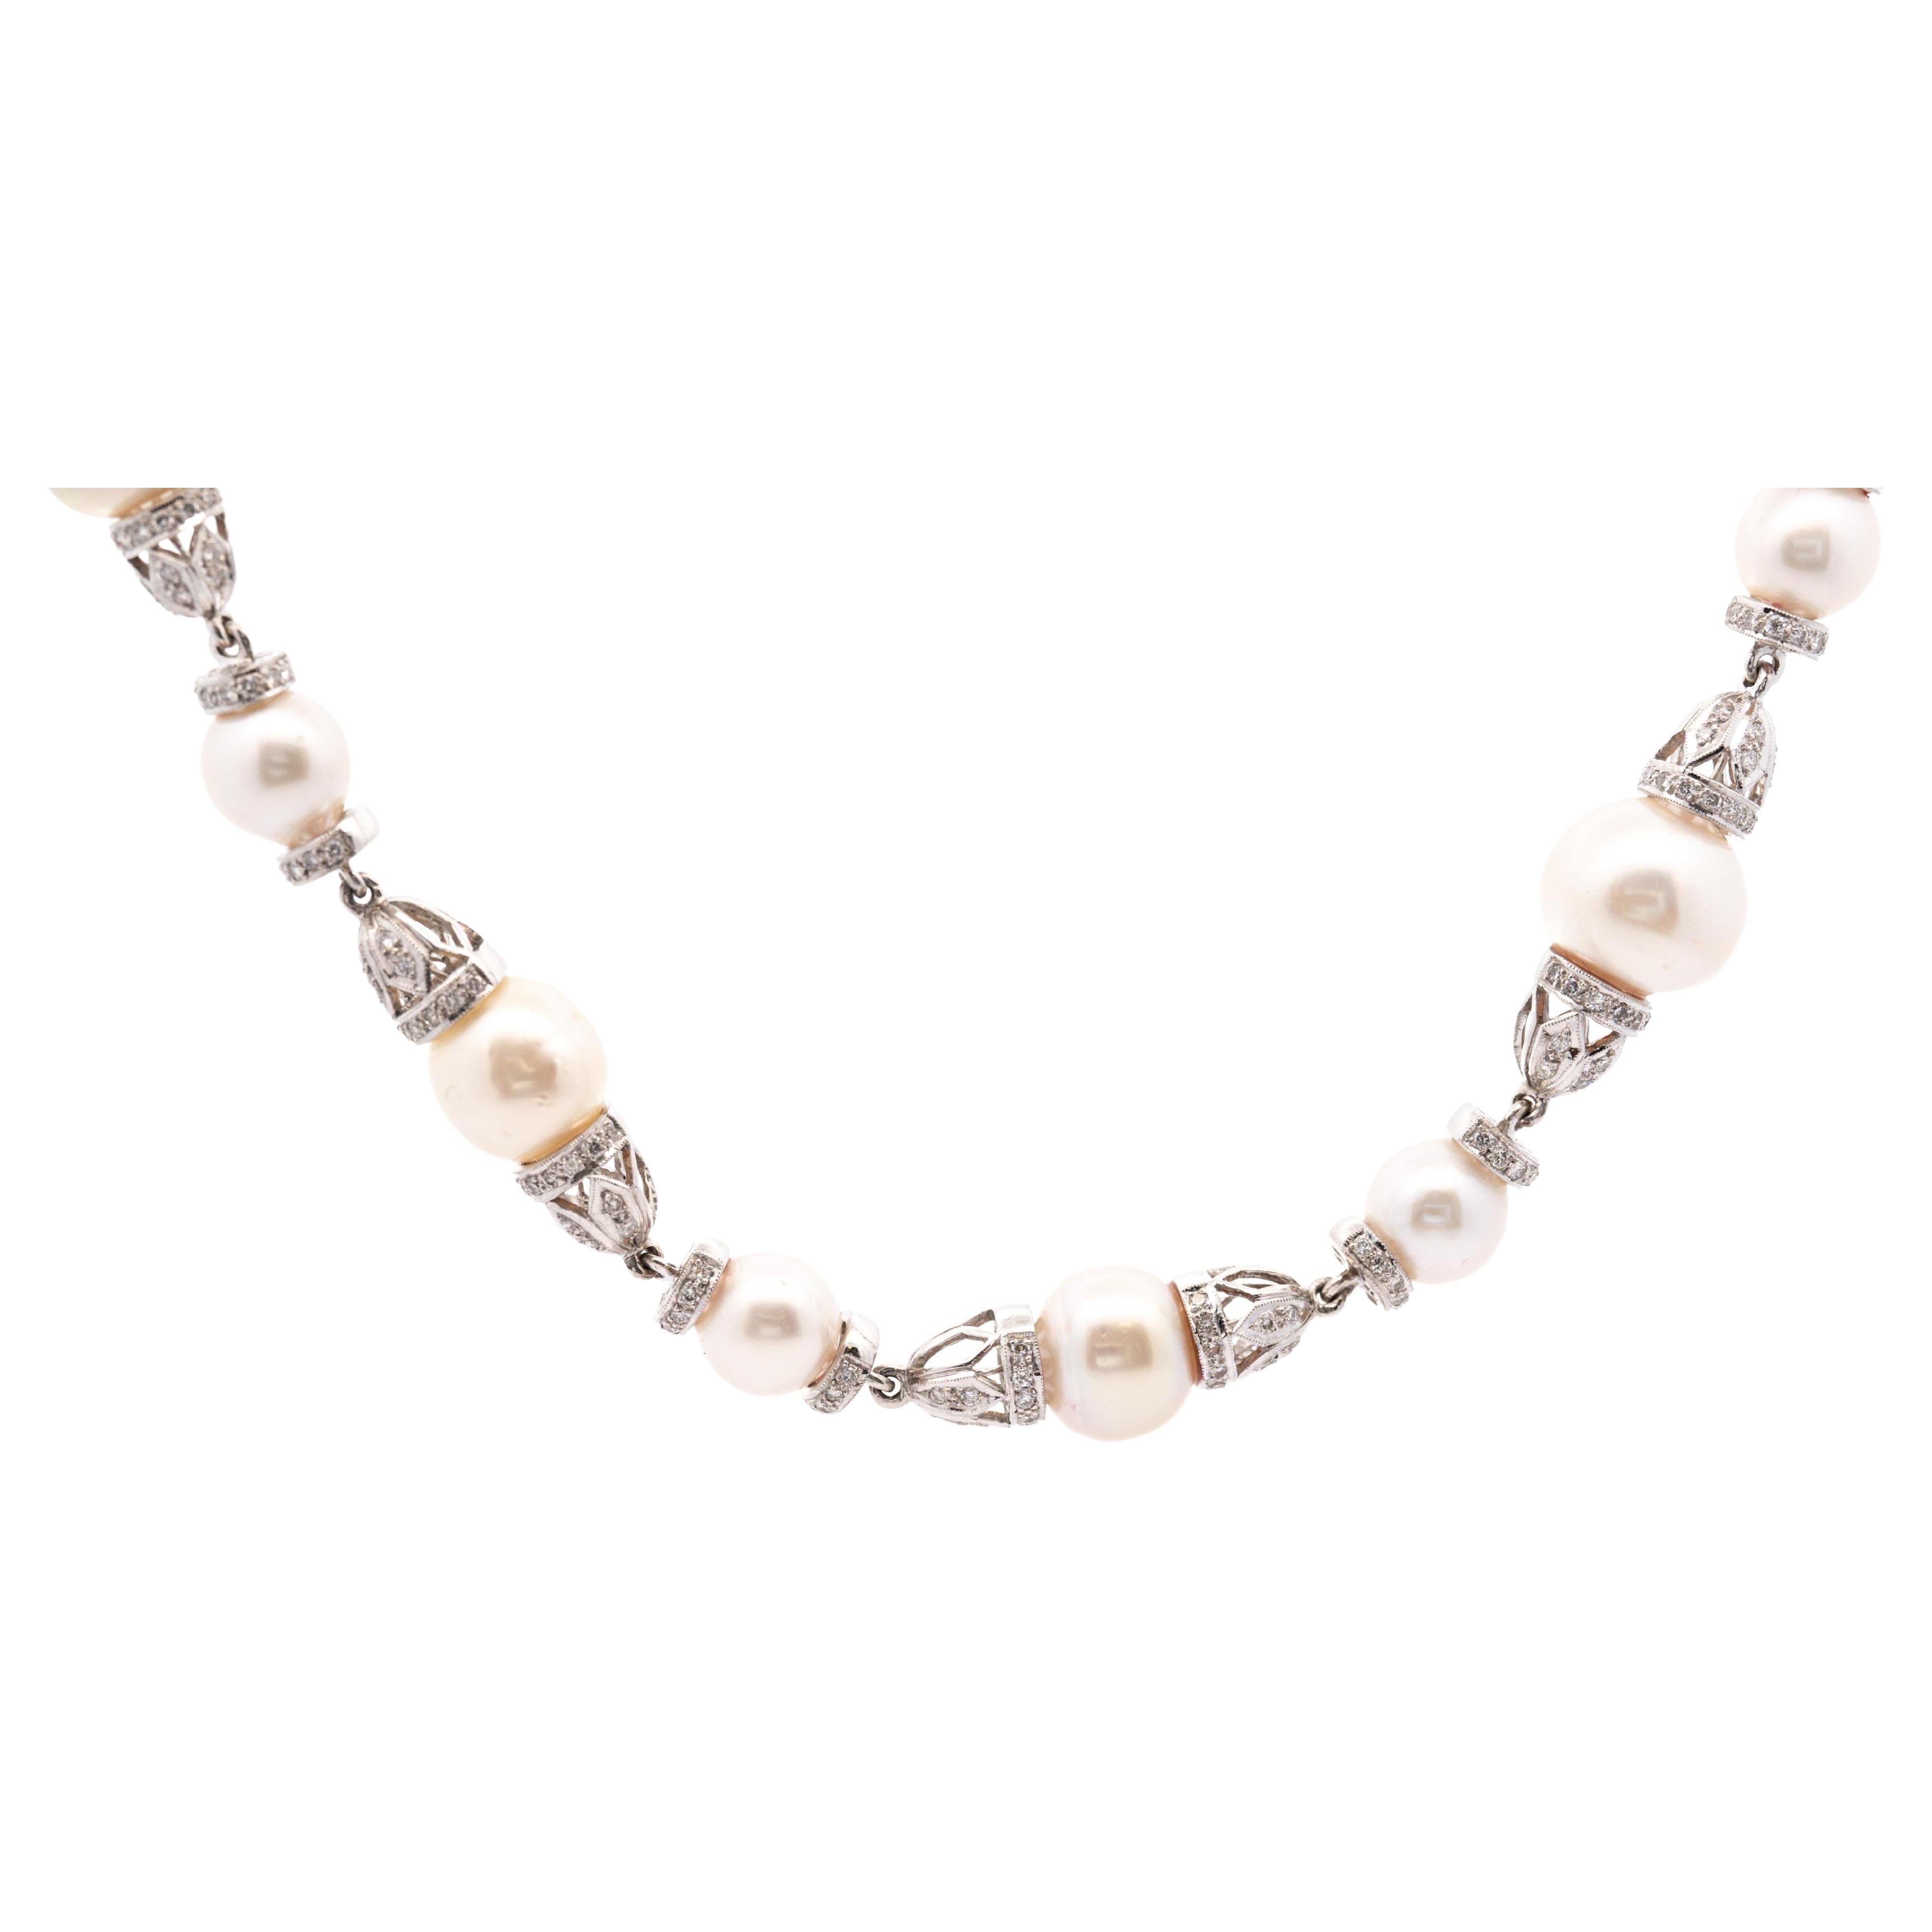 Vintage 18K White Gold 13mm South Sea Pearl & Diamond Choker Necklace For Sale